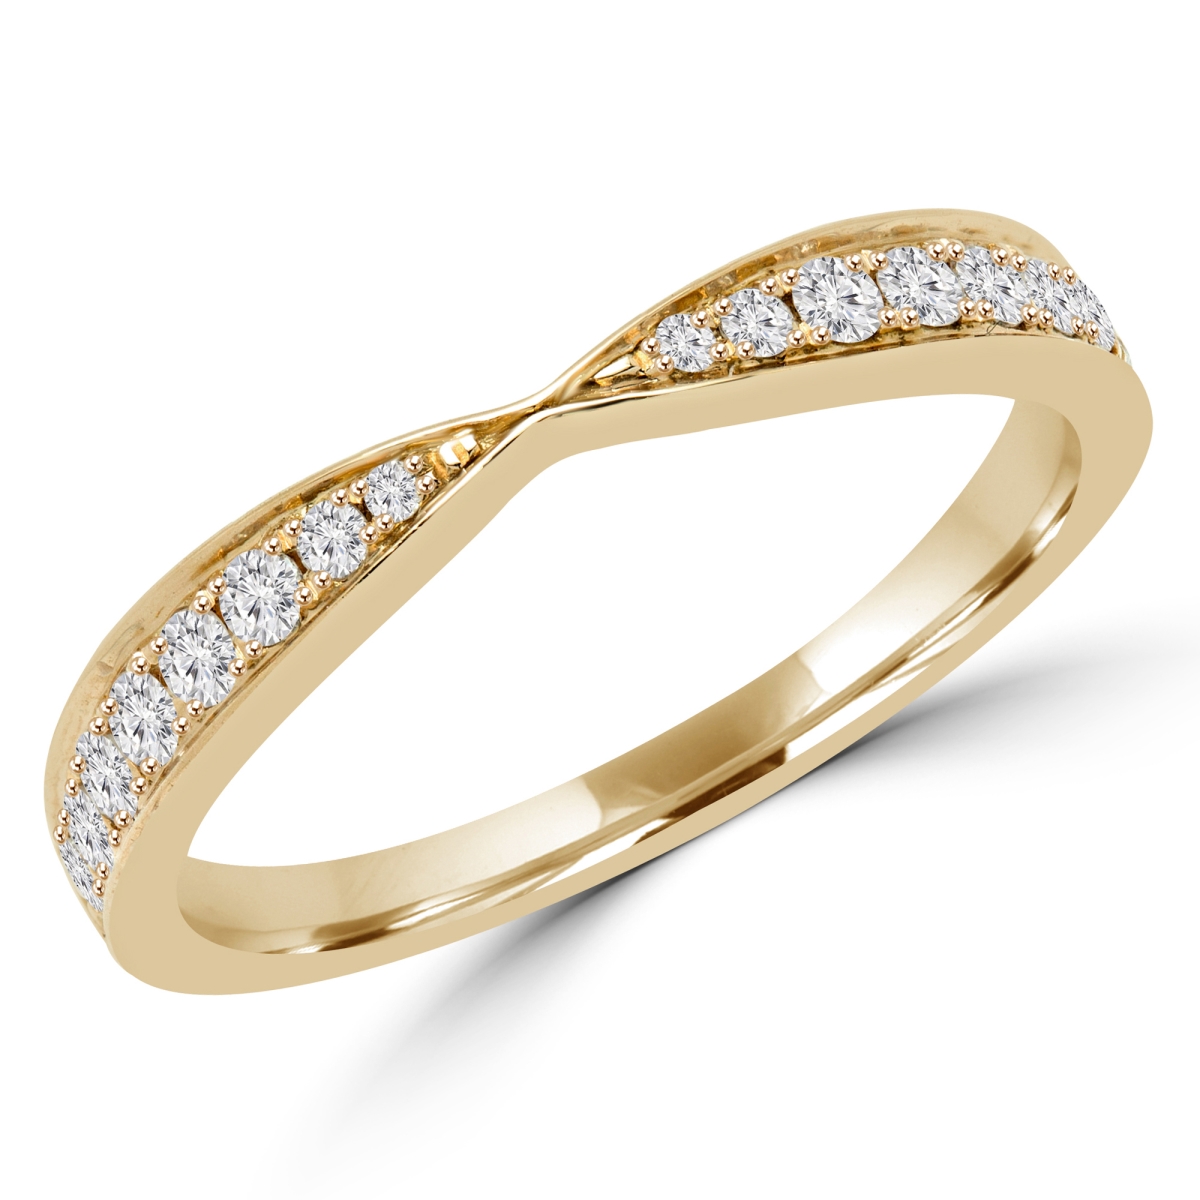 Picture of Majesty Diamonds MD160302-P 0.25 CTW Round Diamond Accent Wedding Anniversary Band Ring in 18K Yellow Gold